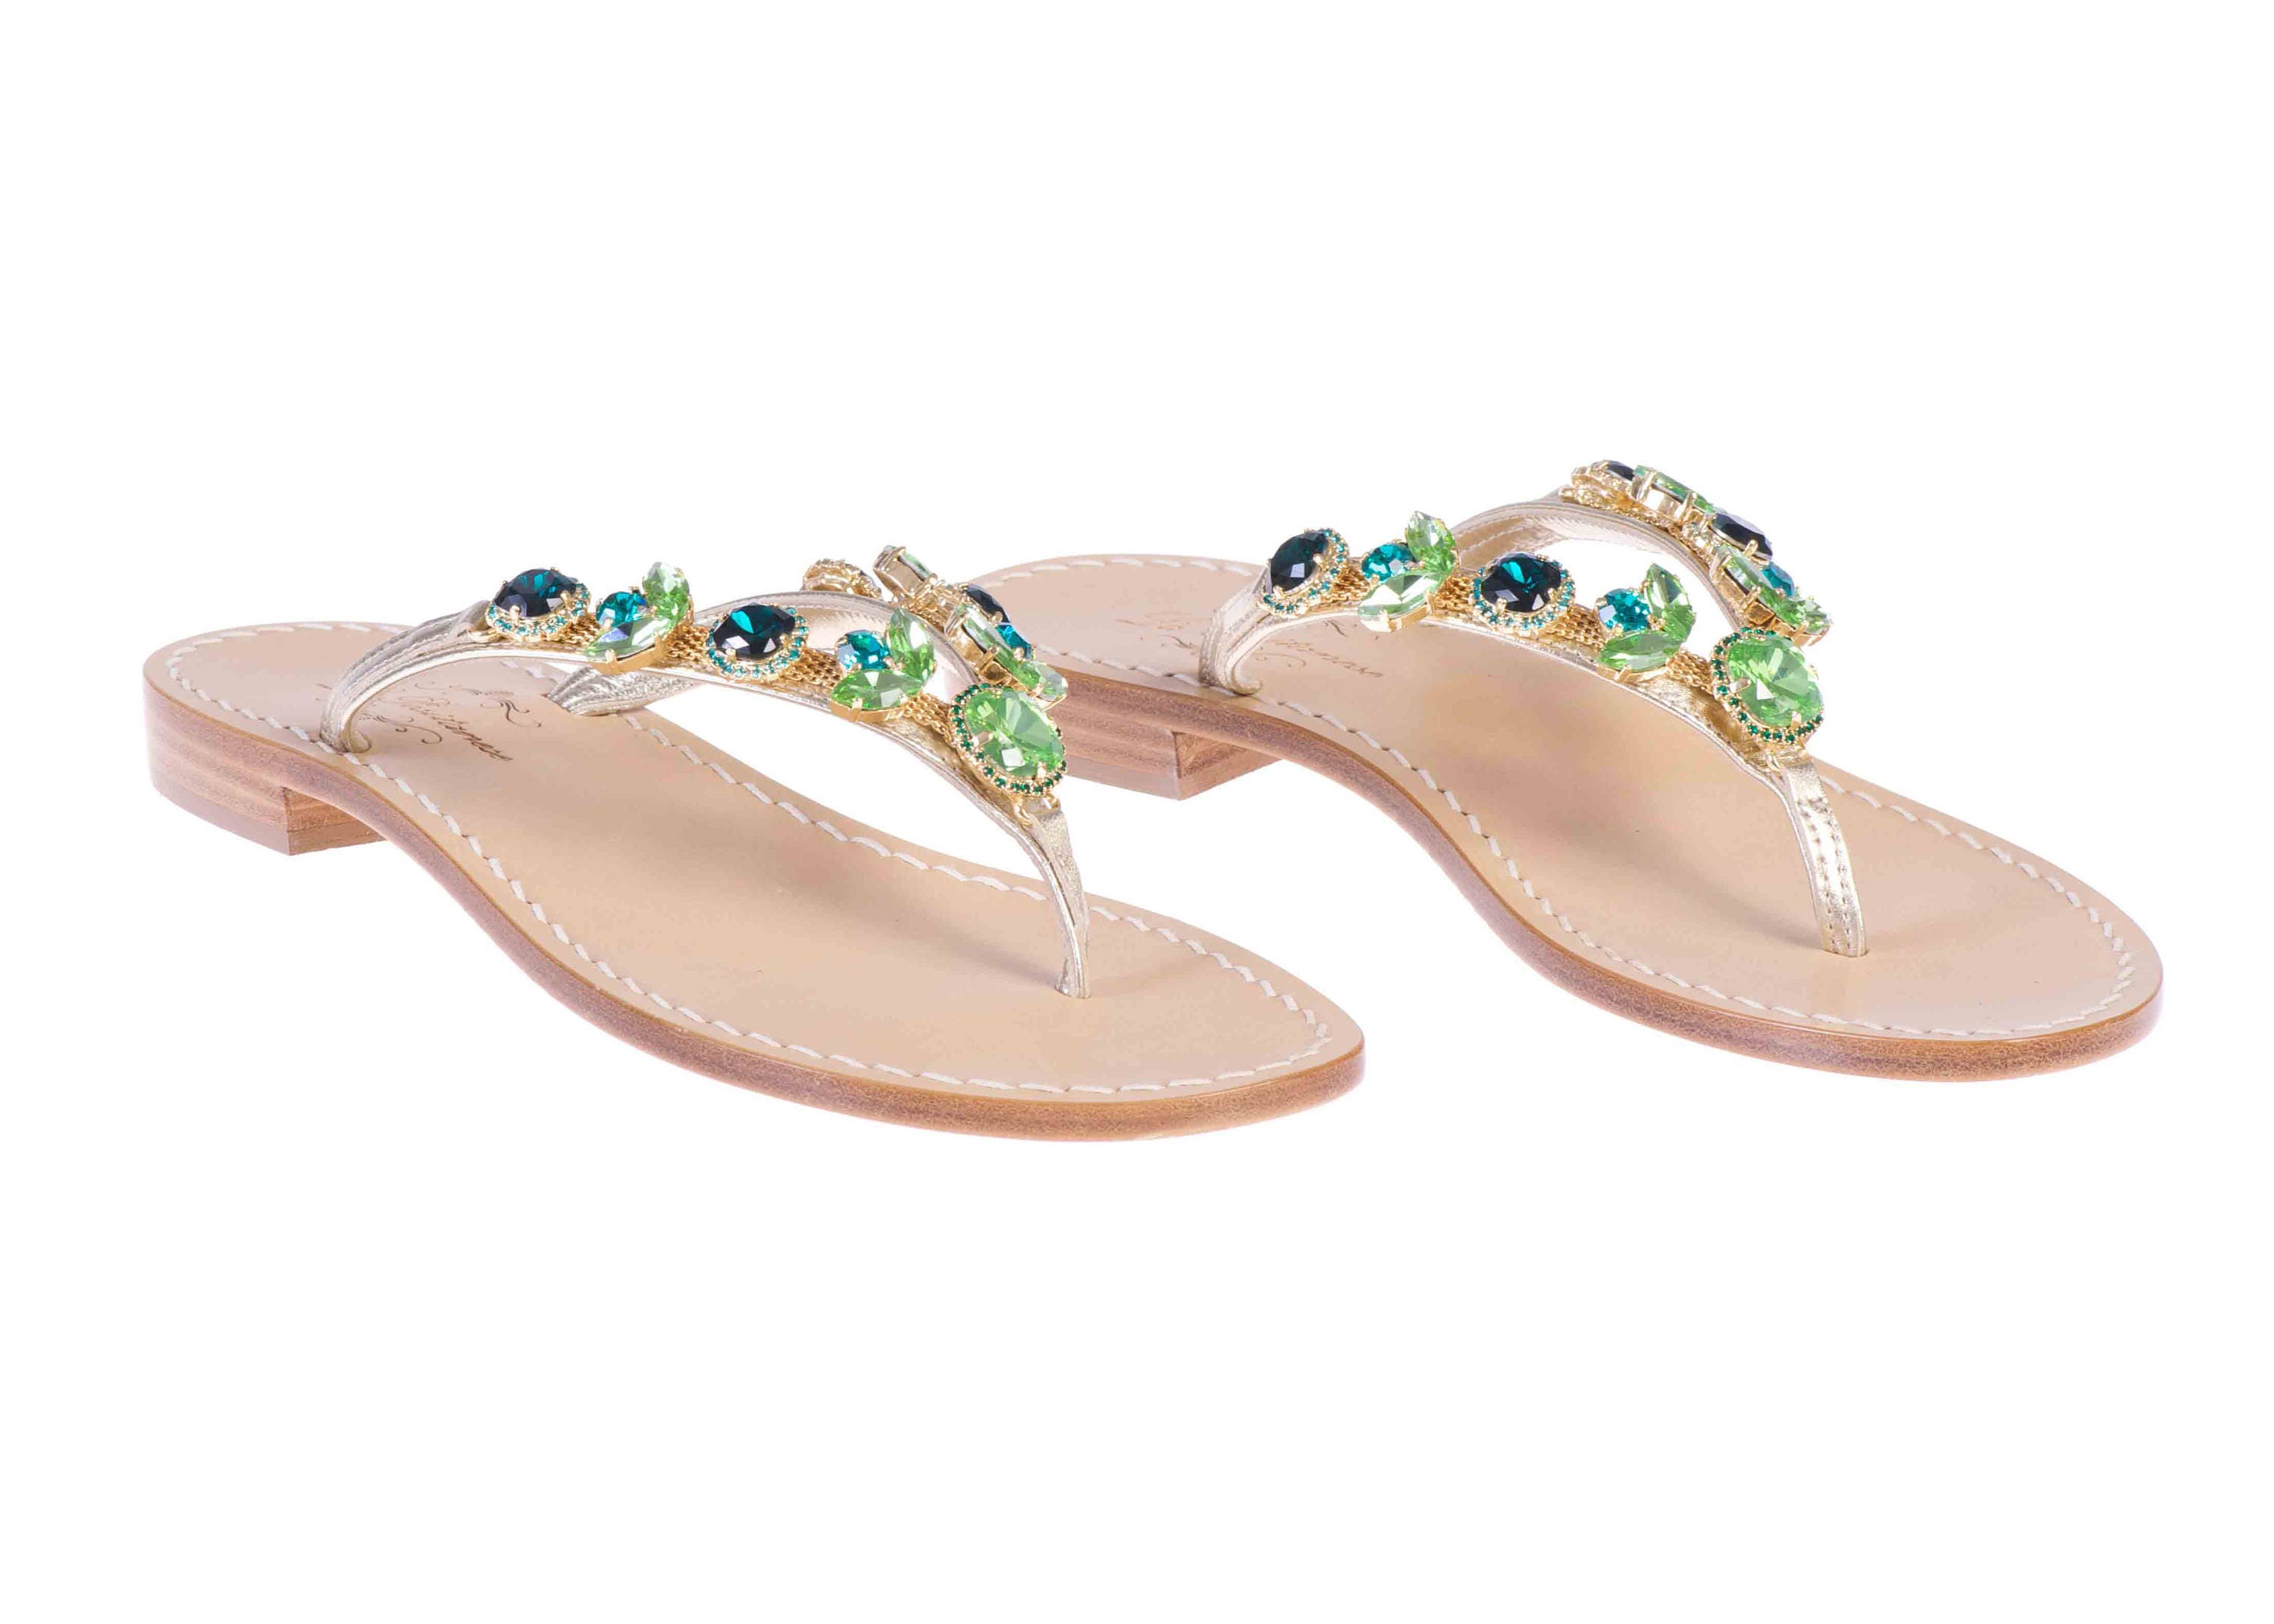 MADE IN ITALY Artisan Made Jeweled Sandals W Tuscan Leather. - Etsy